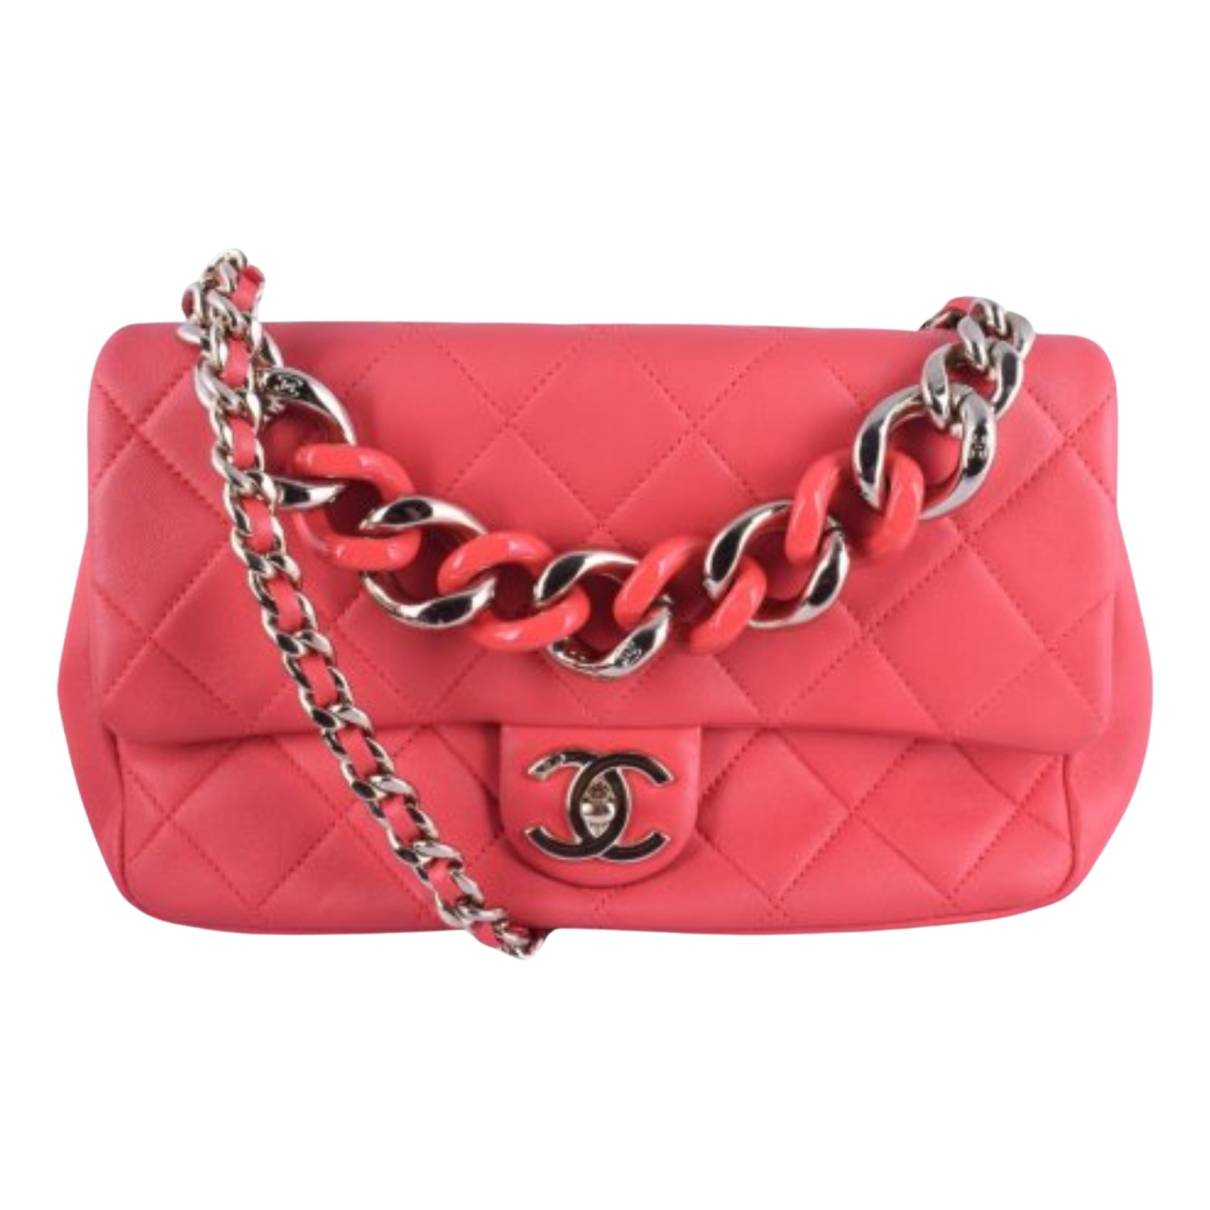 Timeless/classique leather crossbody bag Chanel Red in Leather - 31046946